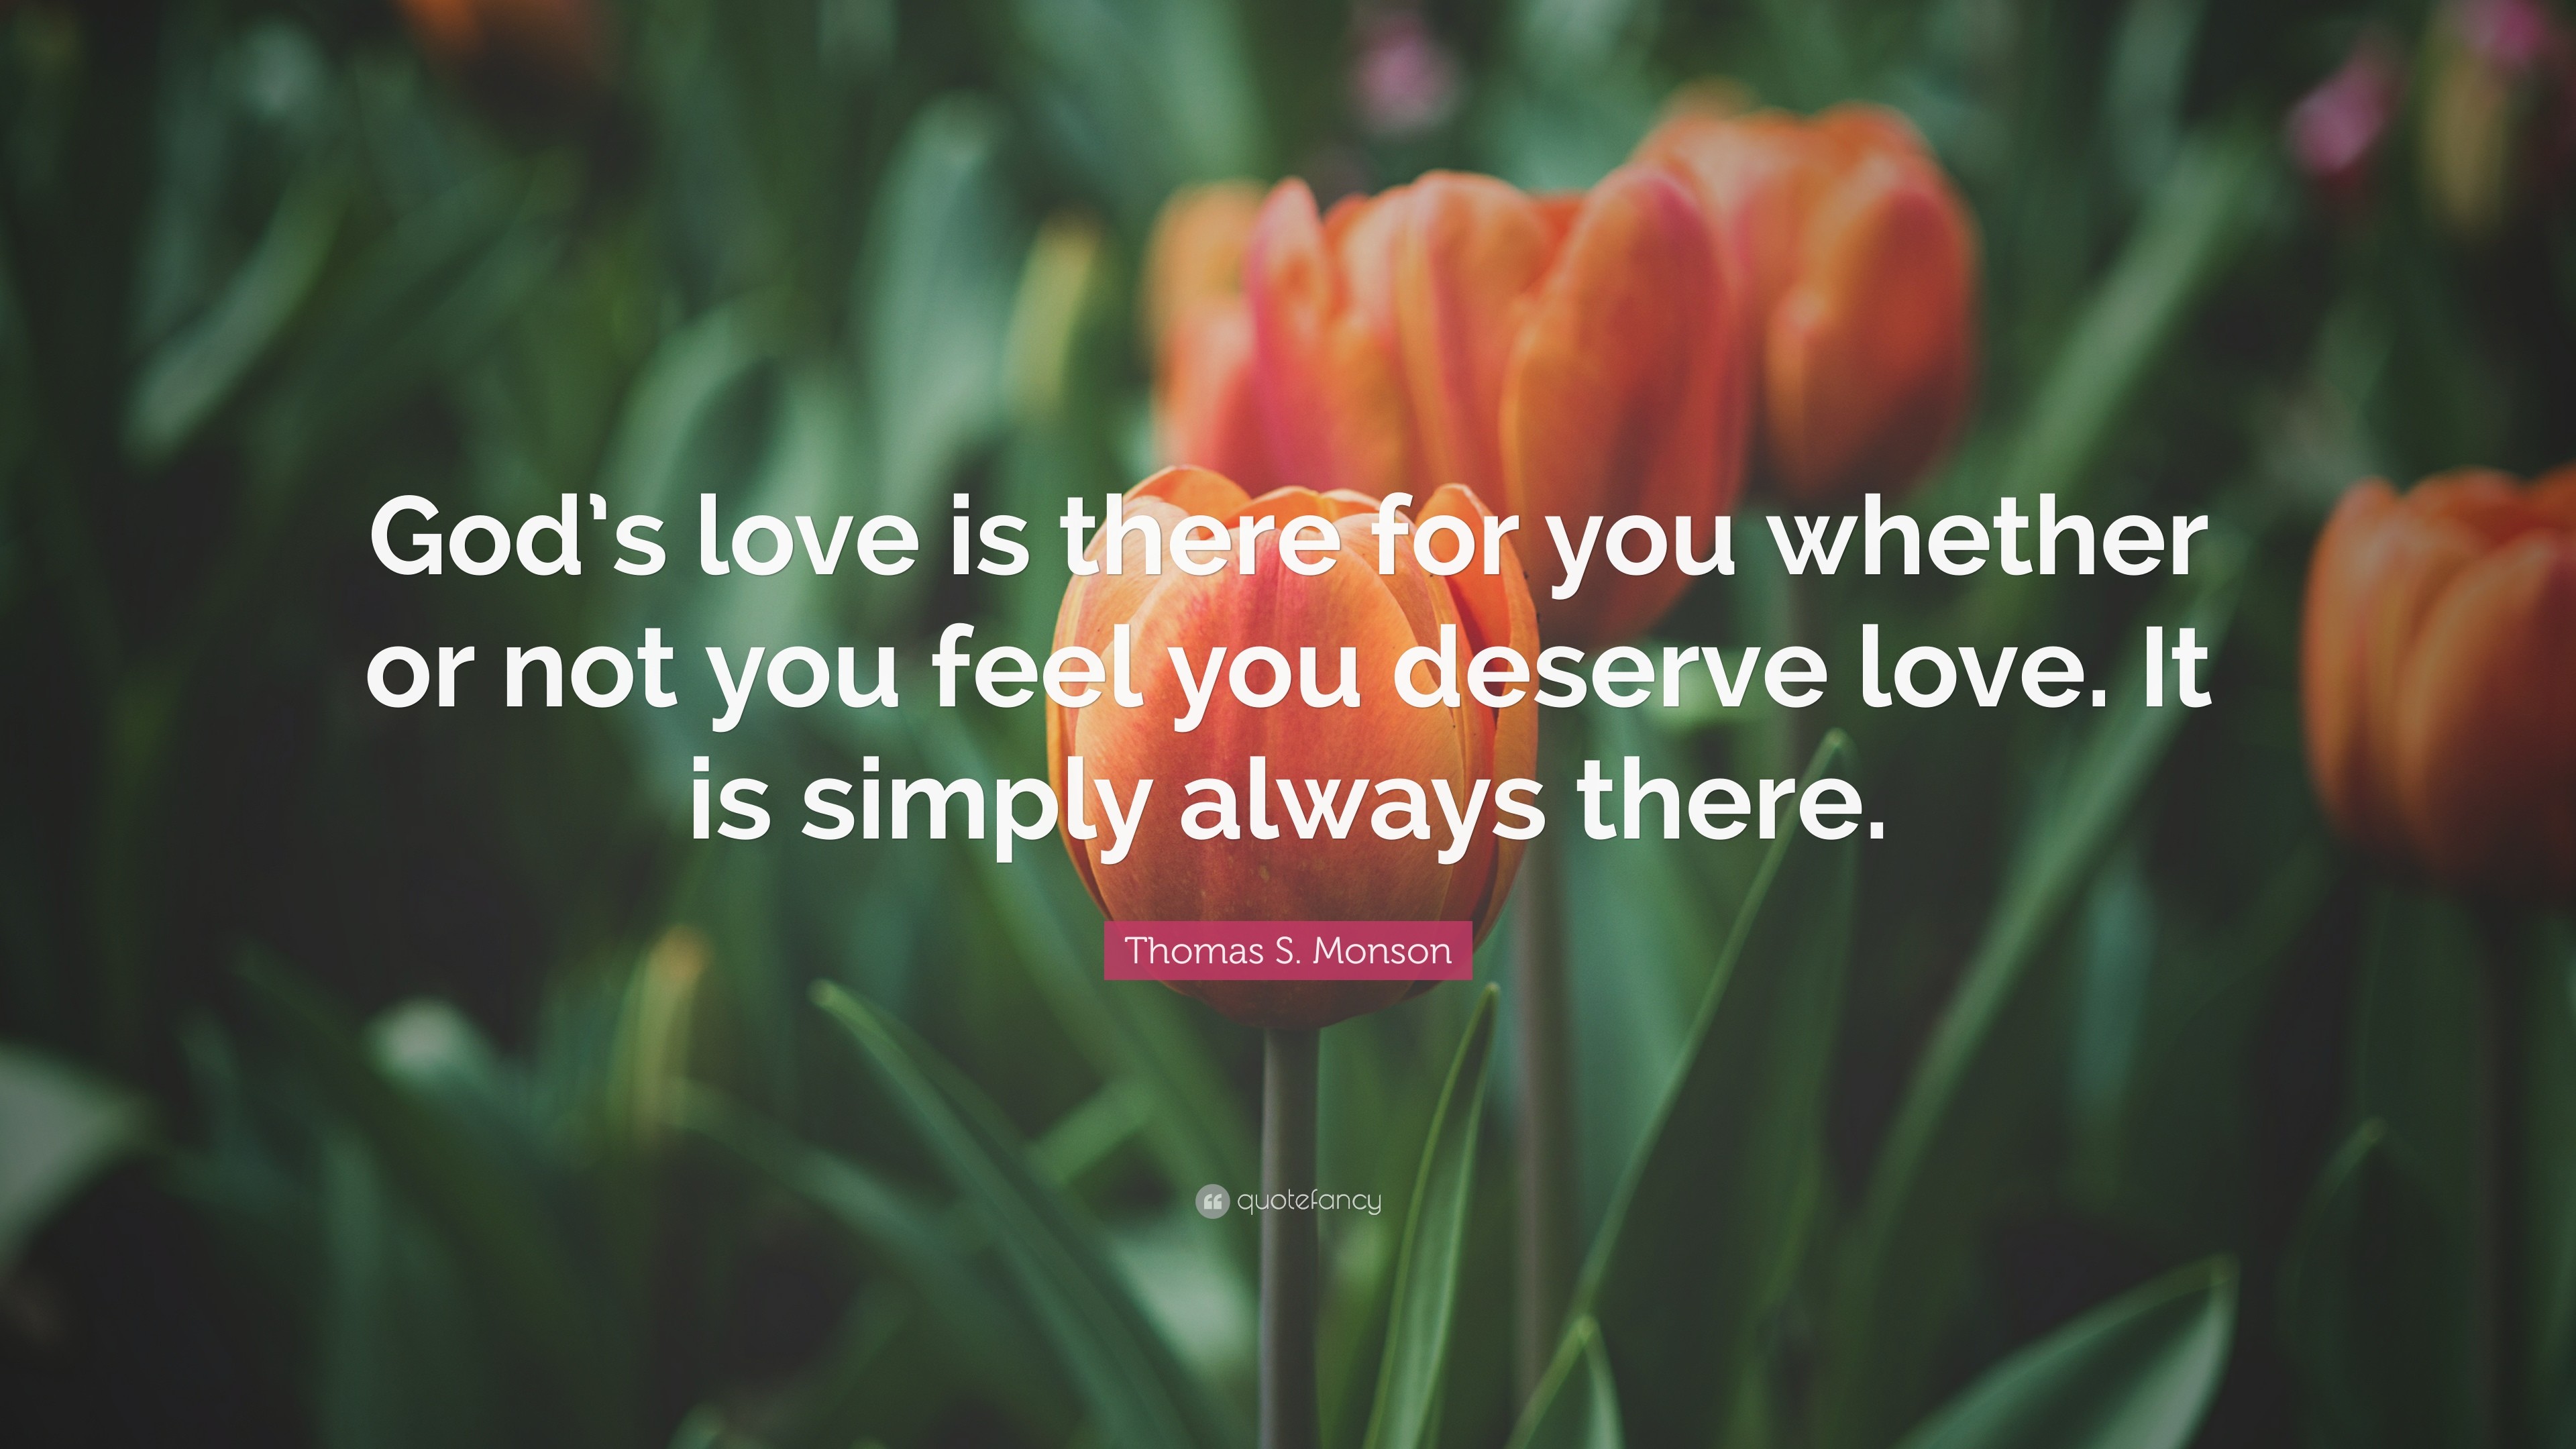 3840x2160 Thomas S. Monson Quote: “God's love is there for you whether or not